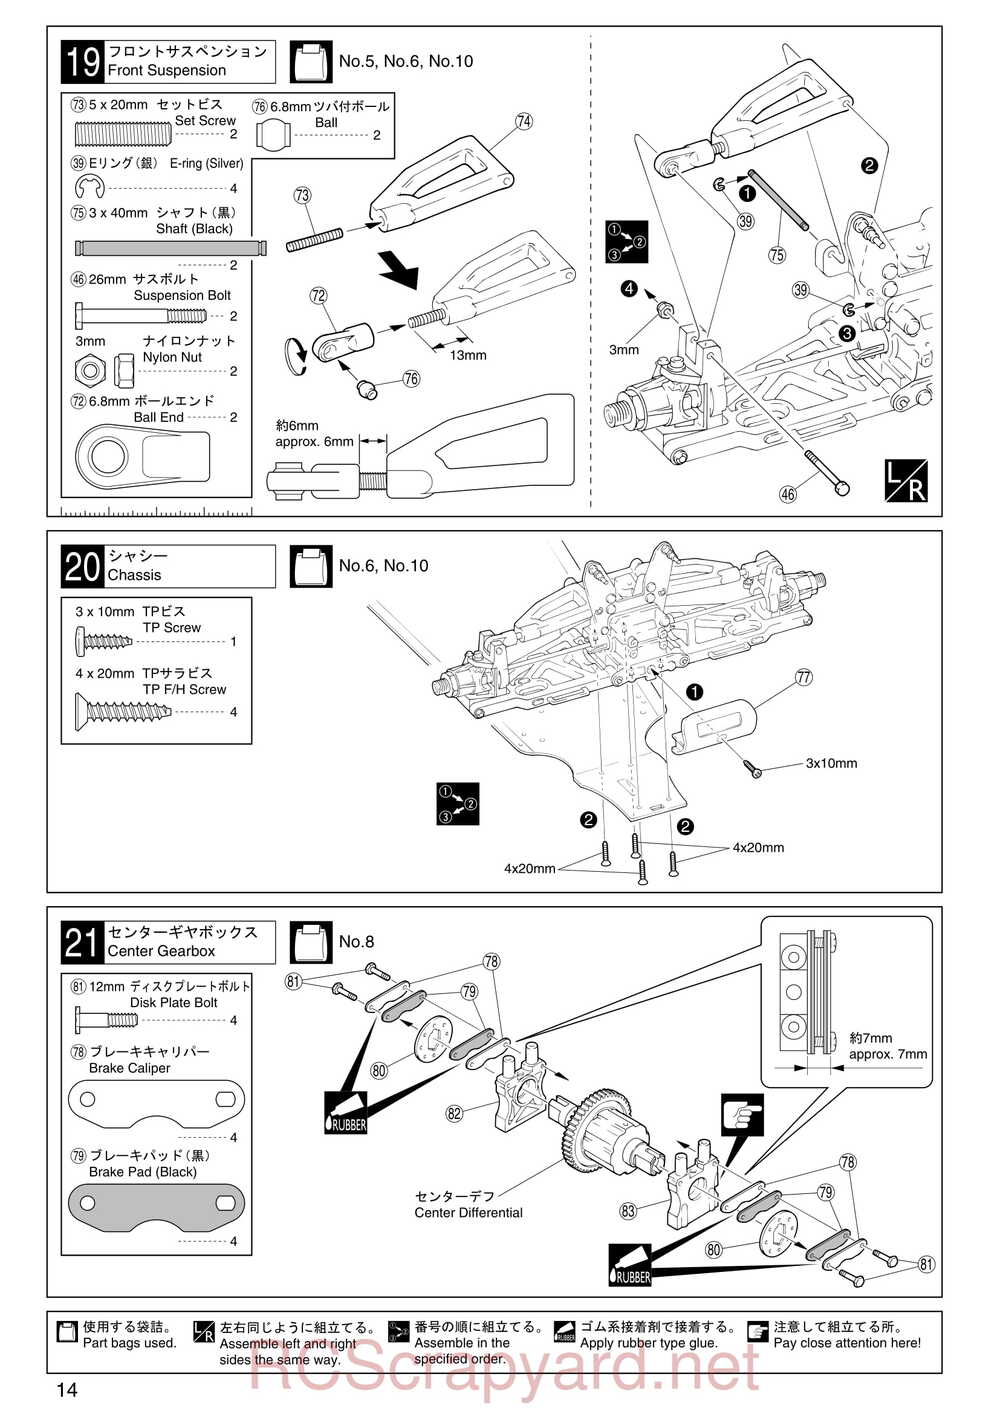 Kyosho - 31081- Inferno-MP-7-5 - Manual - Page 14